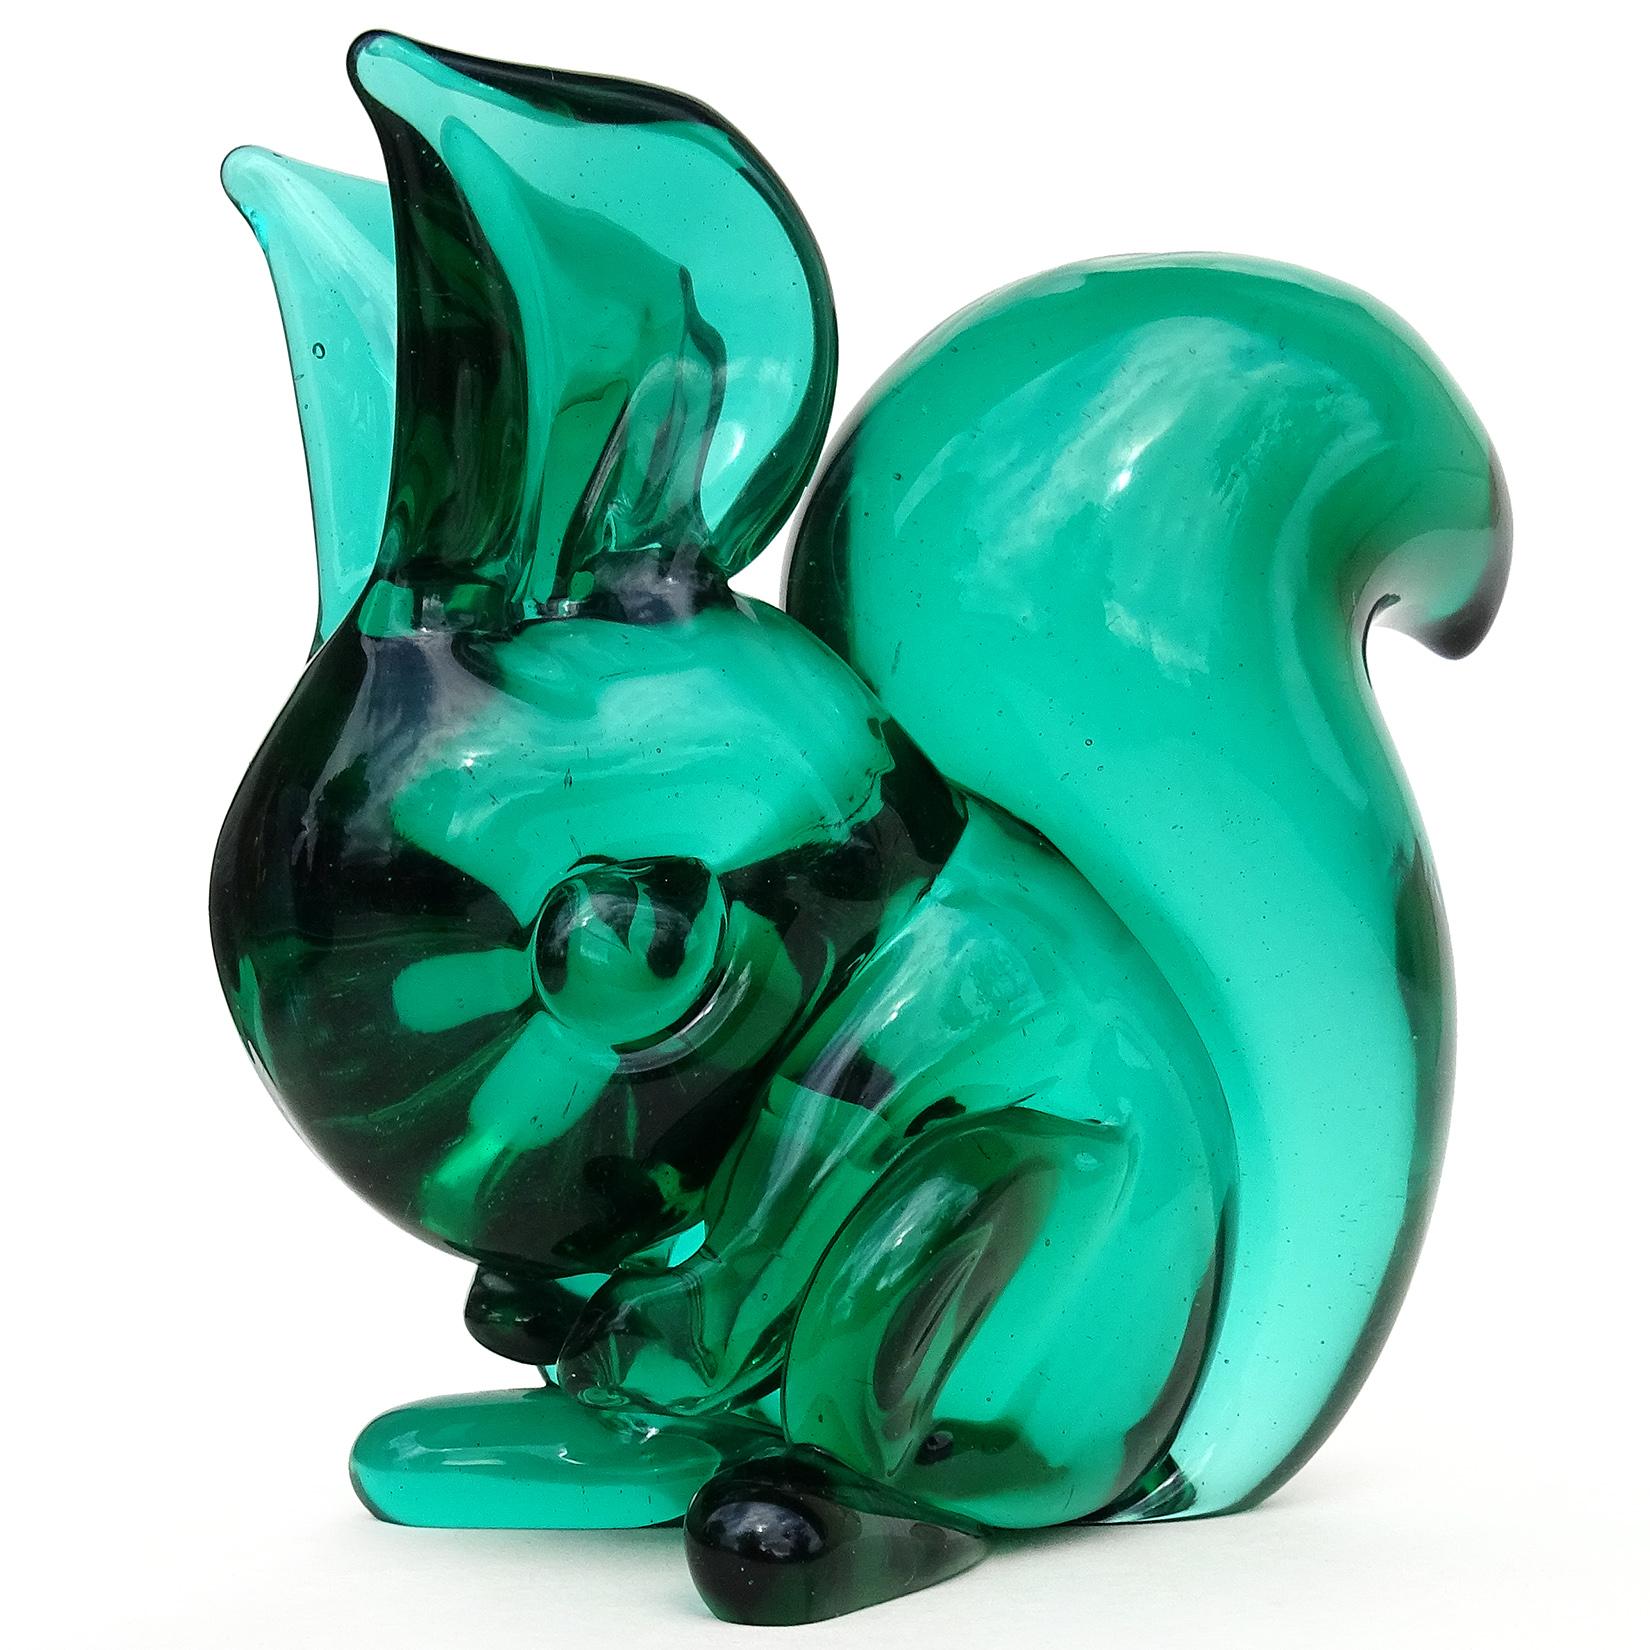 Beautiful, rare, and cute vintage Murano hand blown Sommerso green Italian art glass squirrel figure / sculpture. Documented to designer Flavio Poli for the Seguso Vetri d'Arte company, circa 1950s. Published. Made of very thick glass, and heavy.